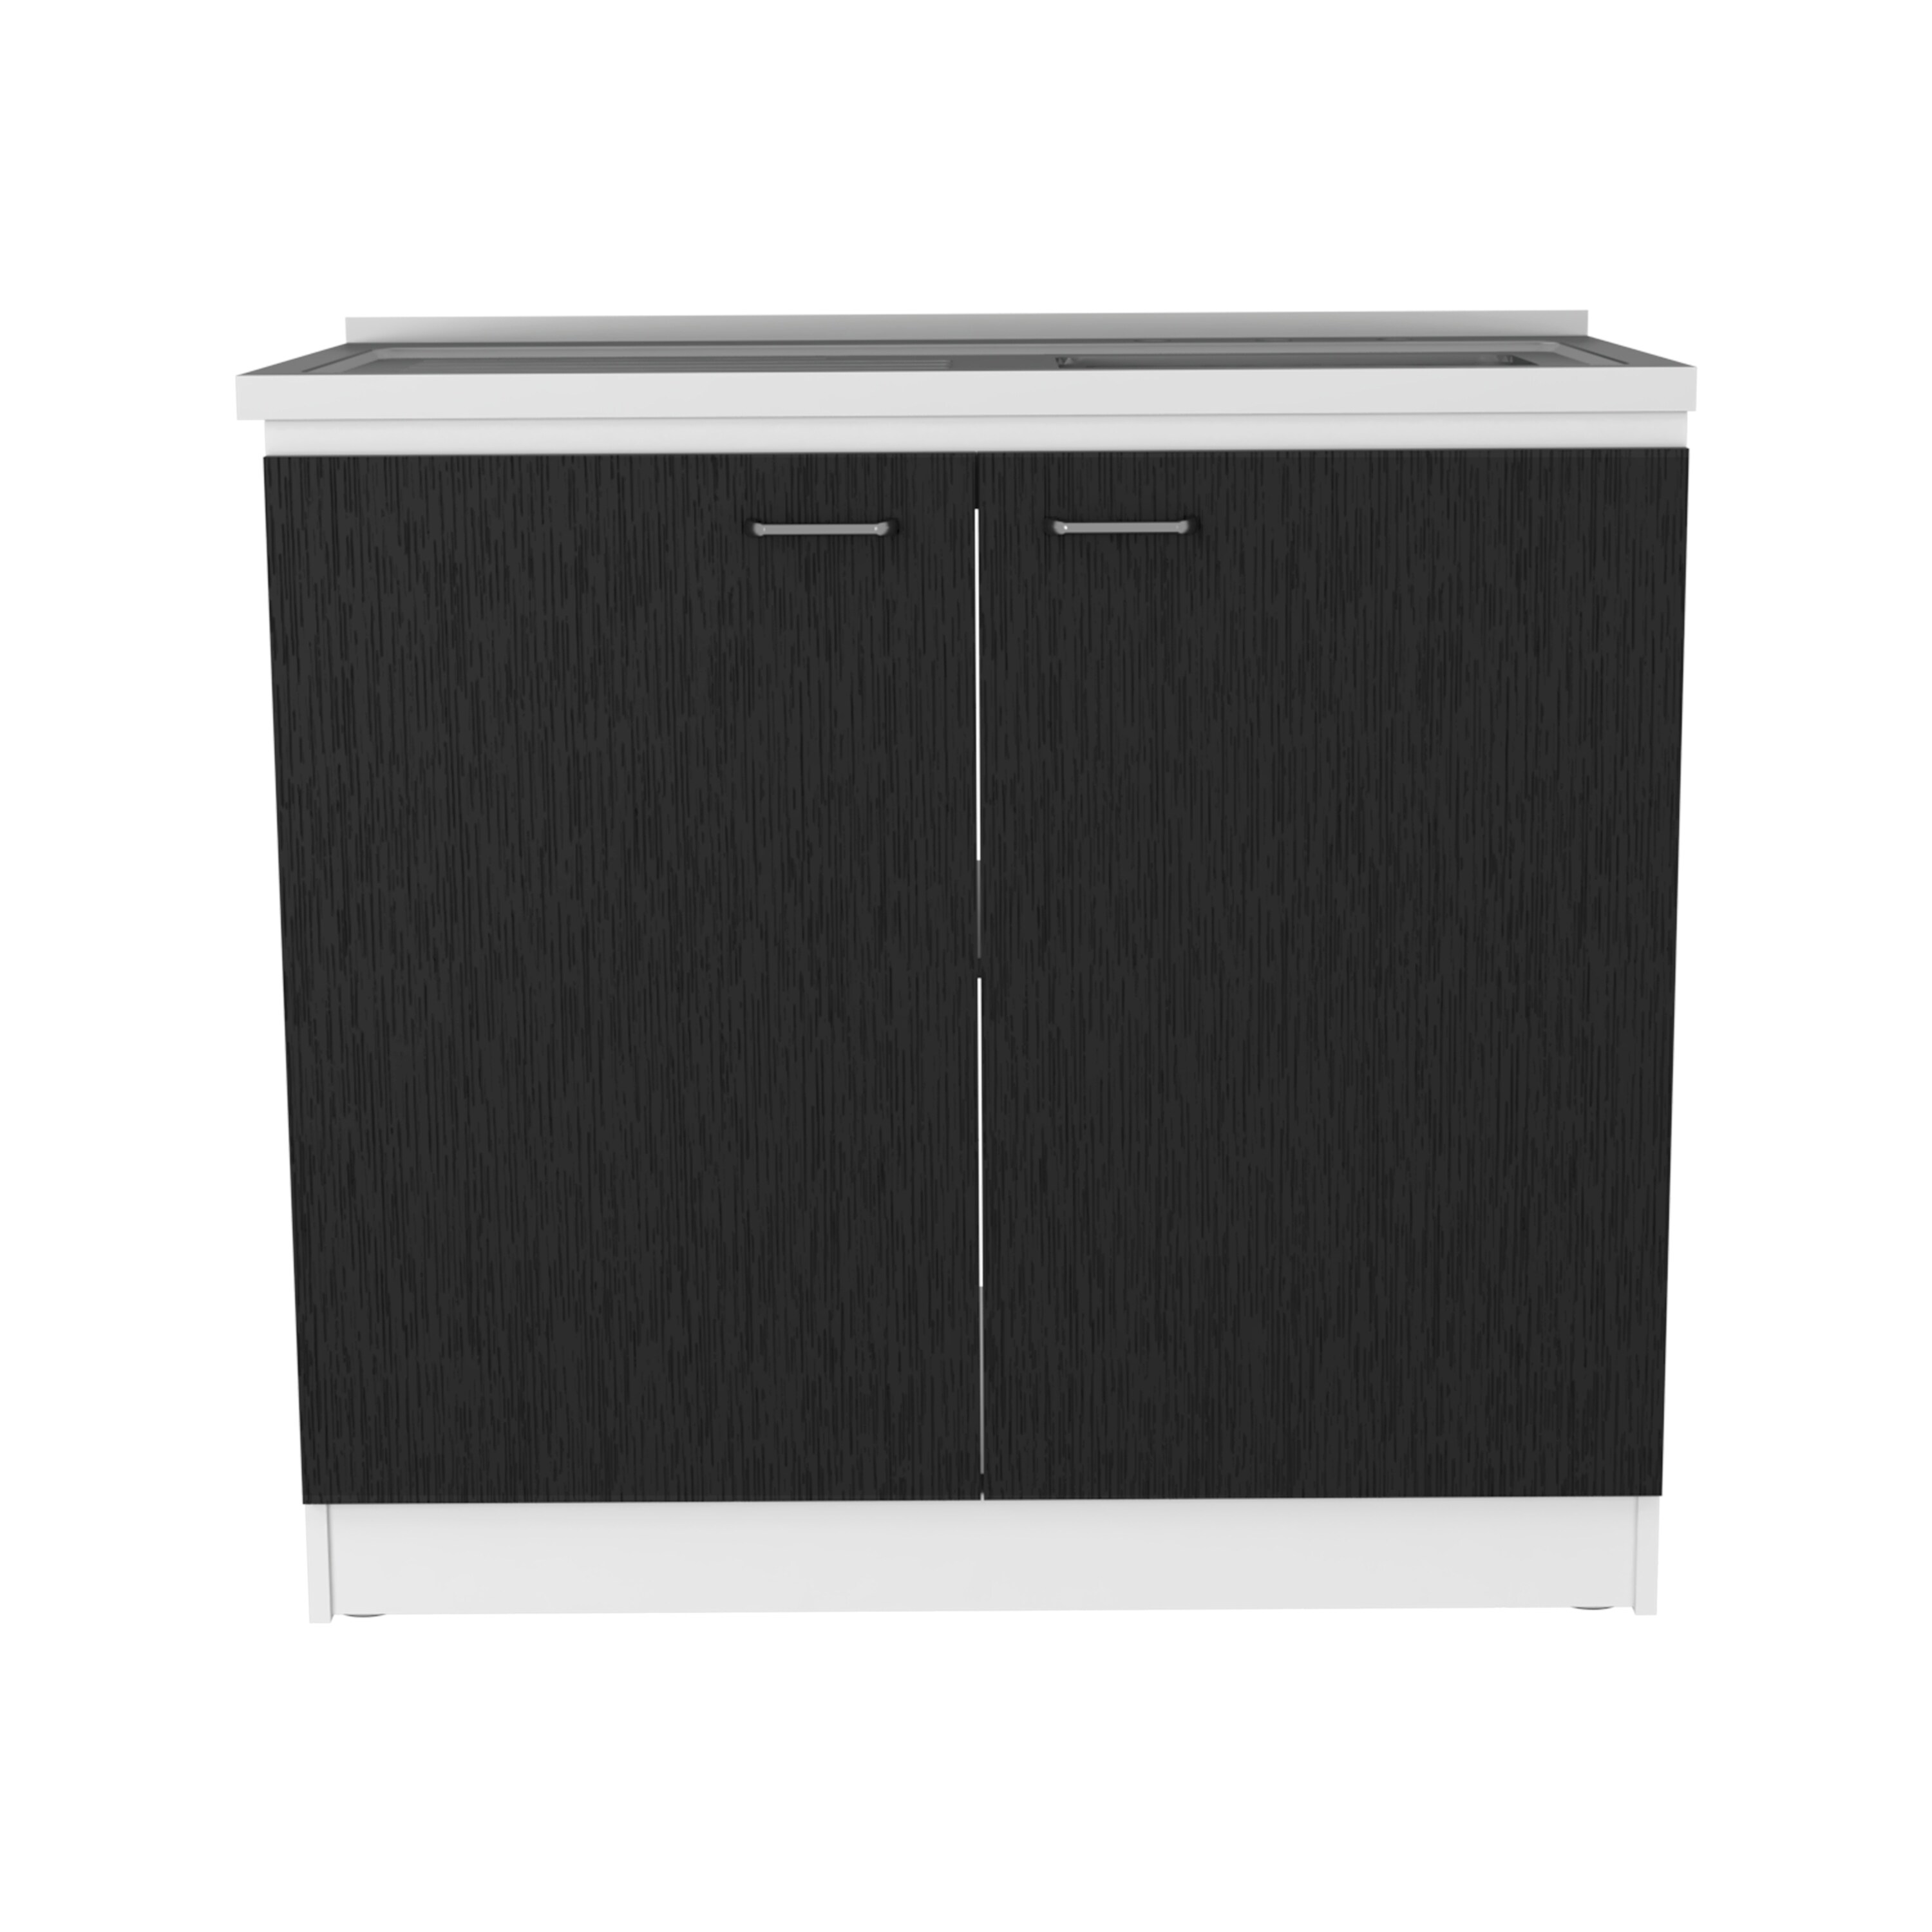 Tuhome Napoles Utility Sink with Cabinet - Espresso